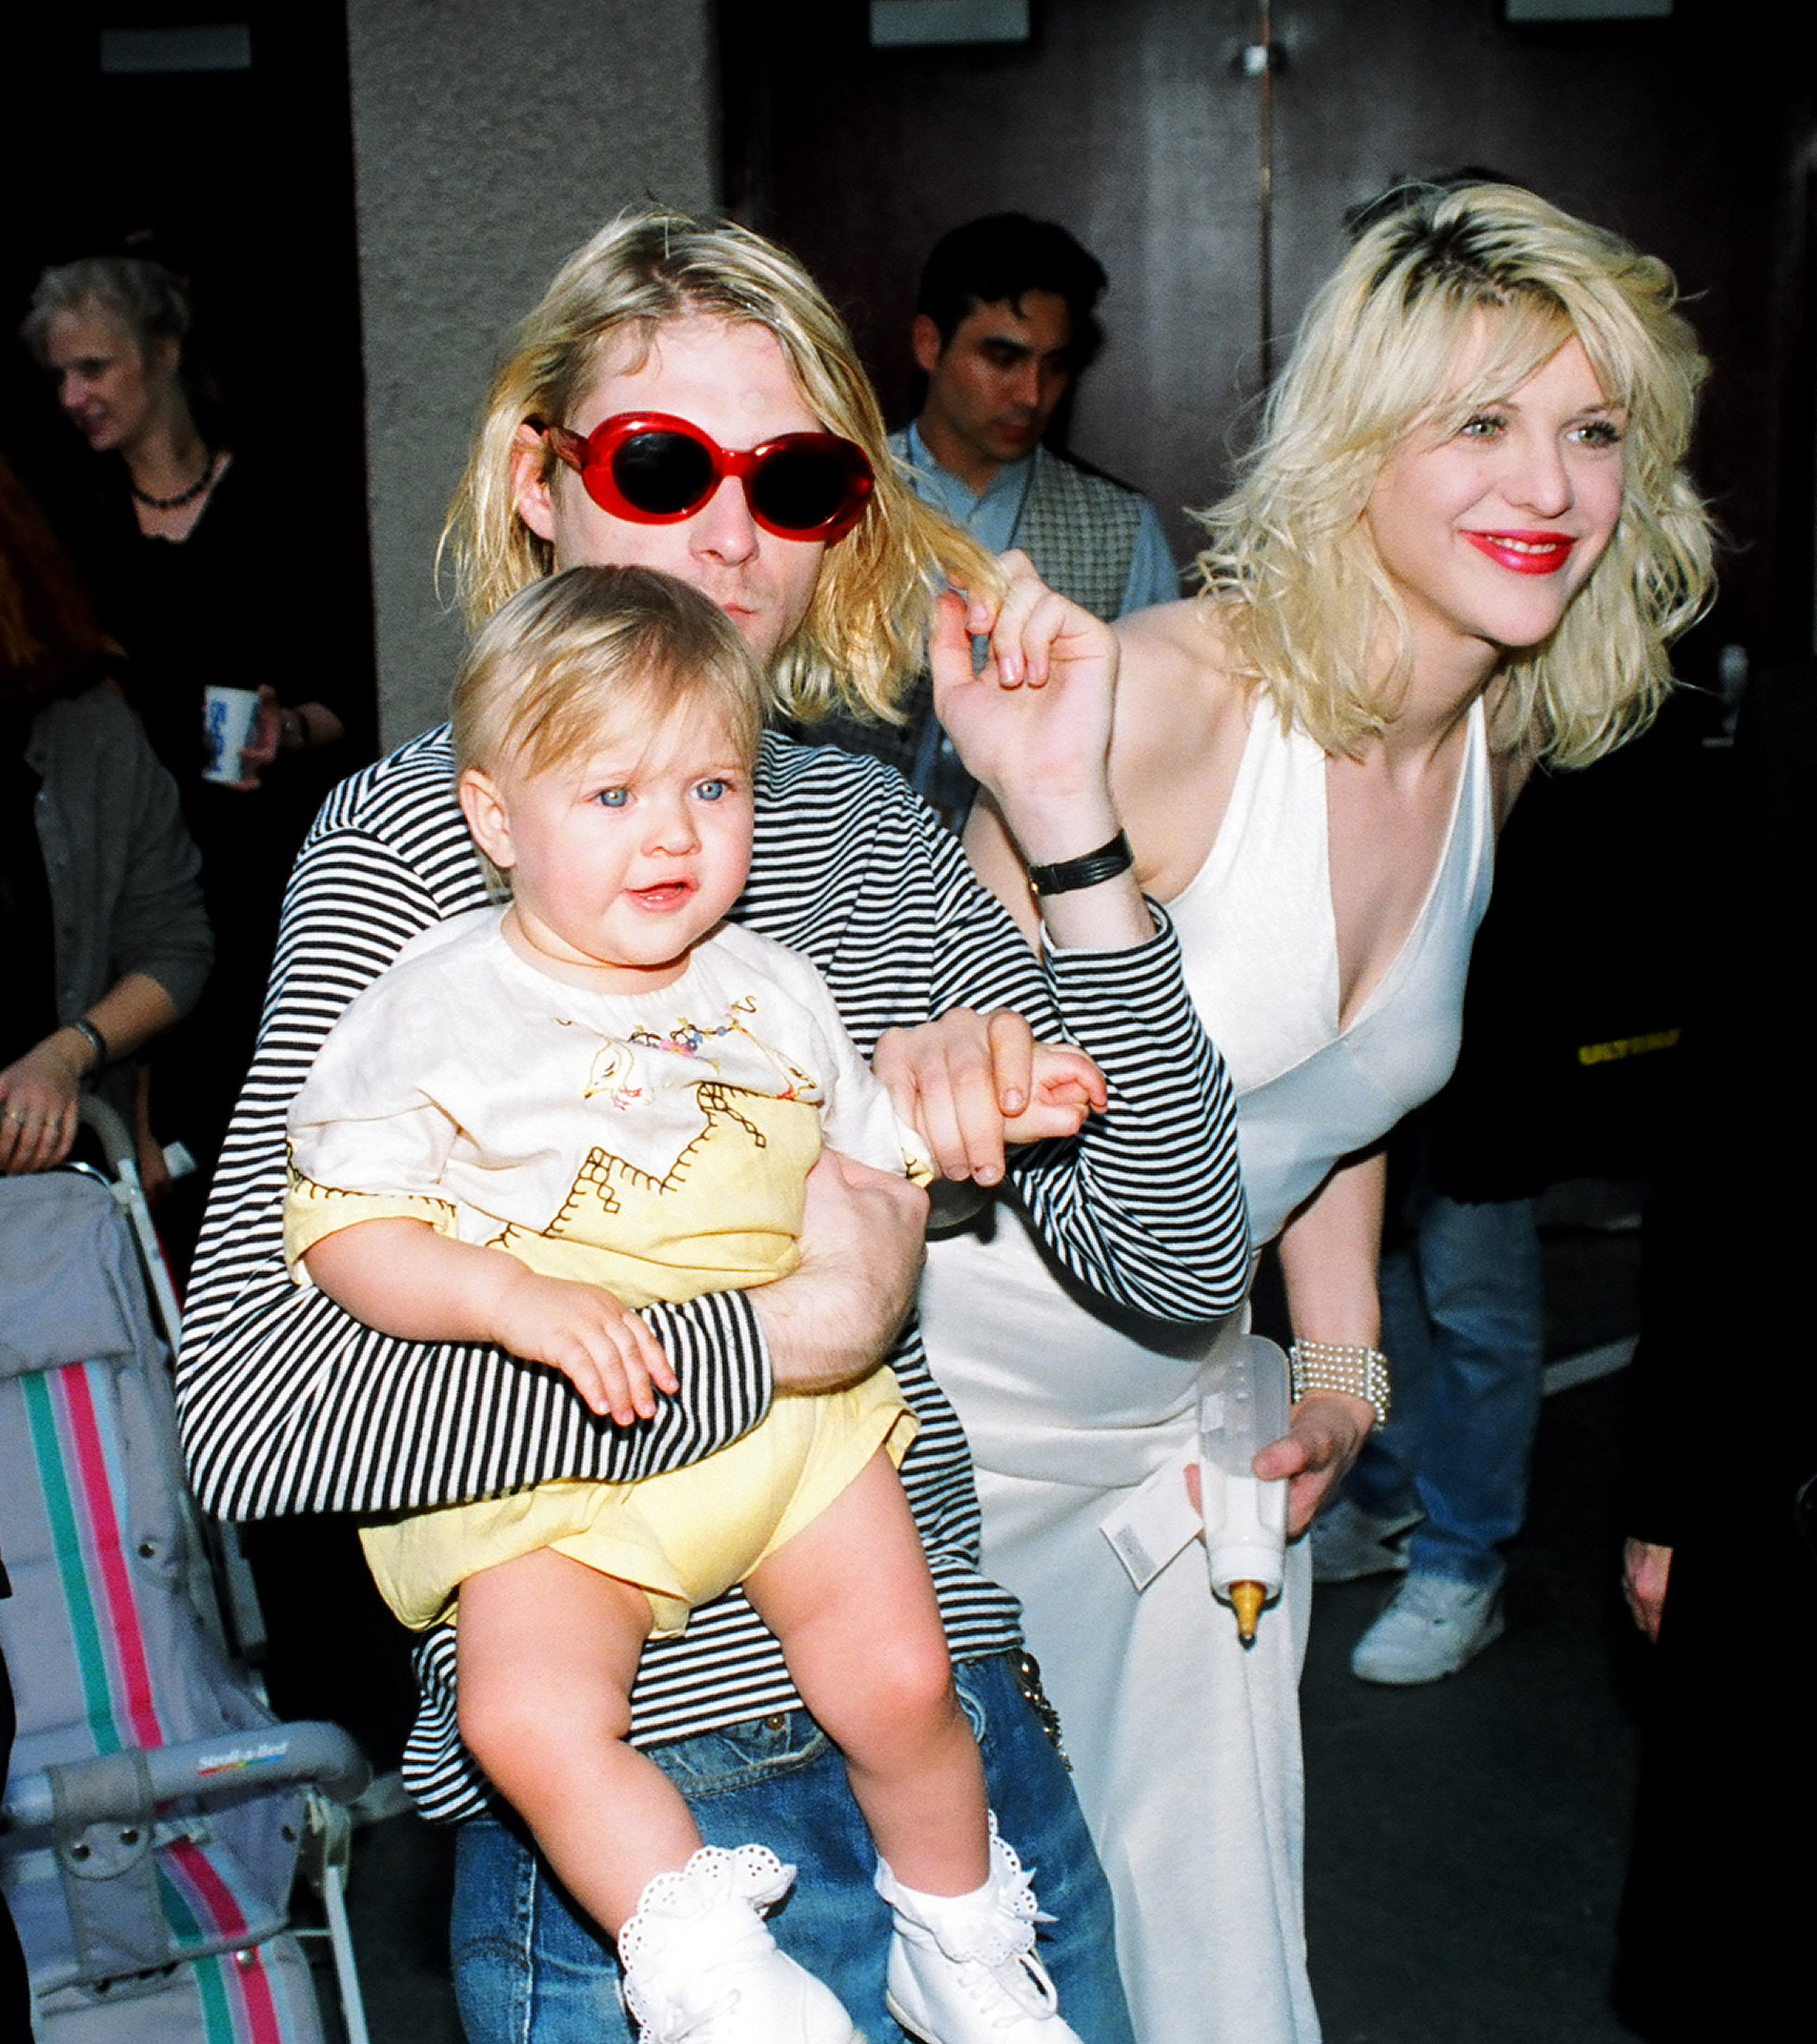 Kurt Cobain of Nirvana and Courtney Love with their daughter Frances Bean Cobain at the 1993 MTV Video Music Awards on September 2, 1993. | Source: Getty Images